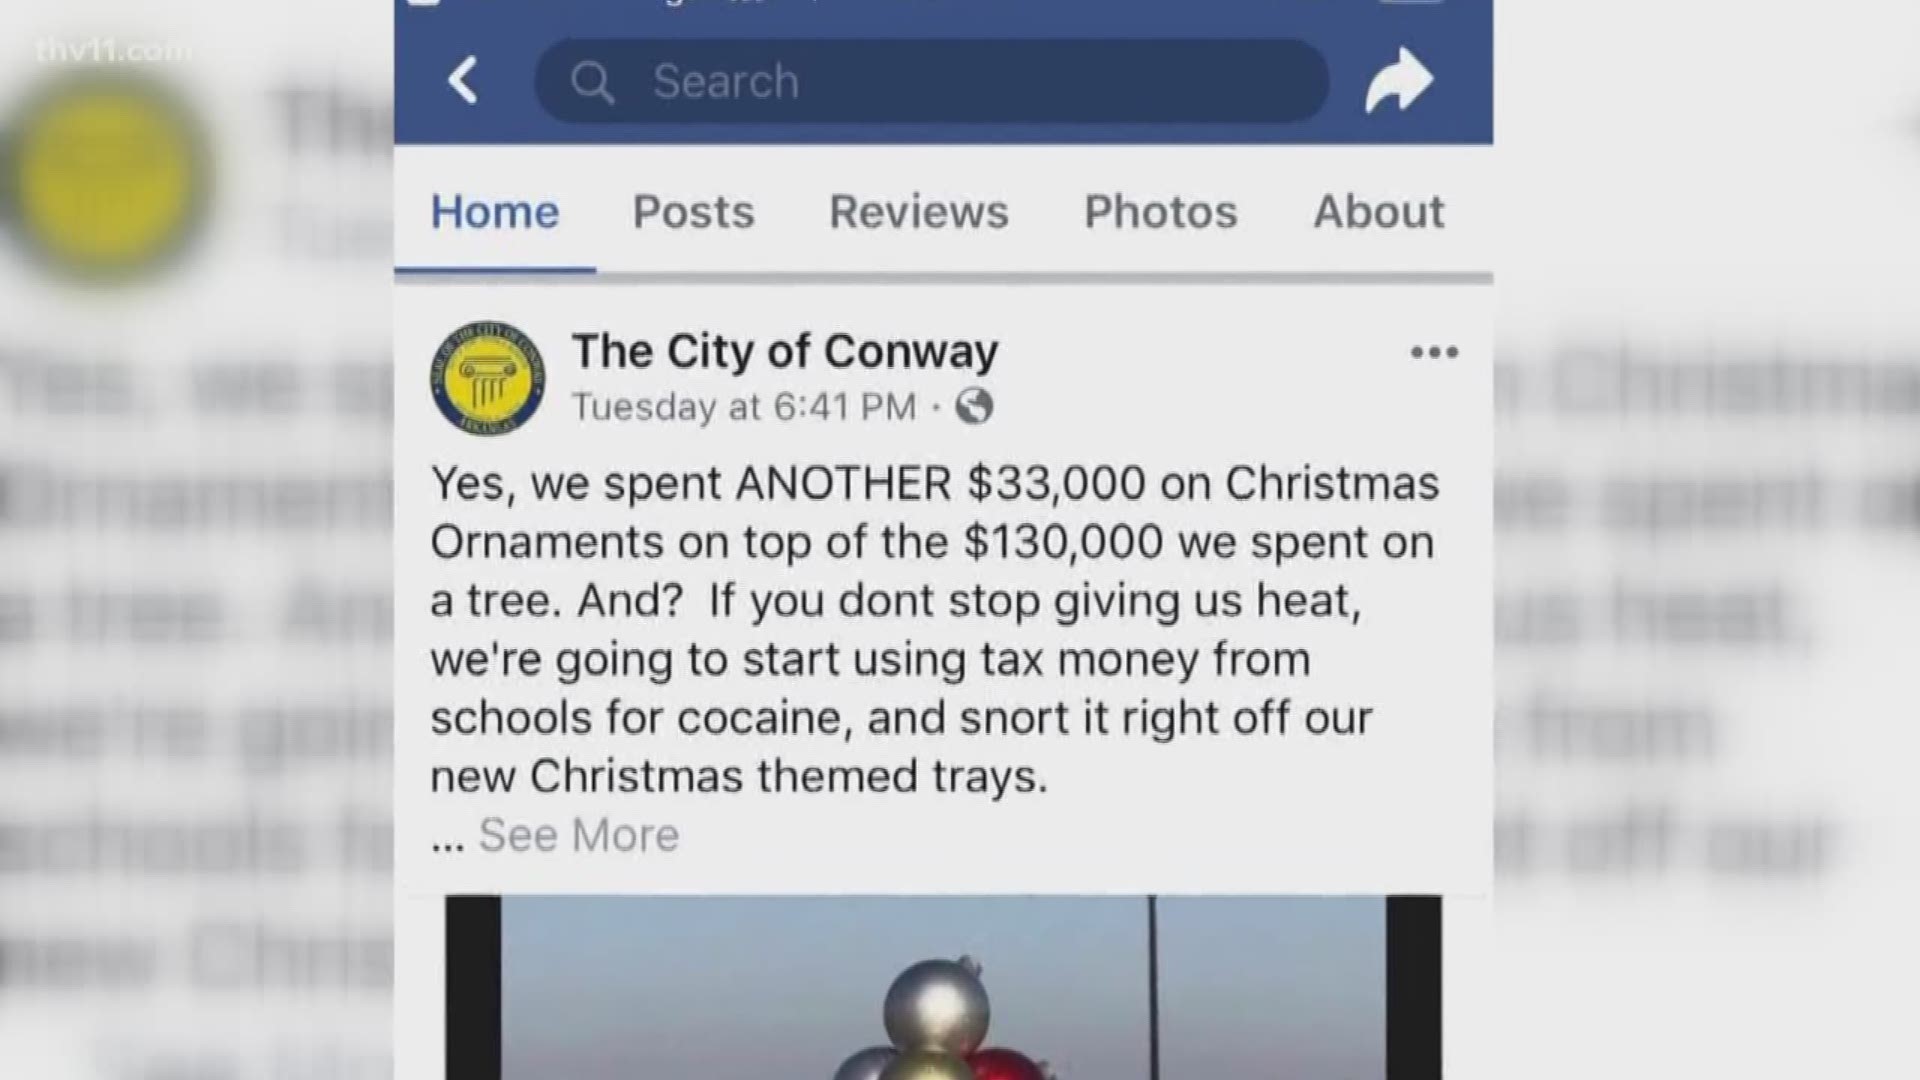 The city is dealing with roughly 6 false Facebook accounts, claiming to be the city of Conway.